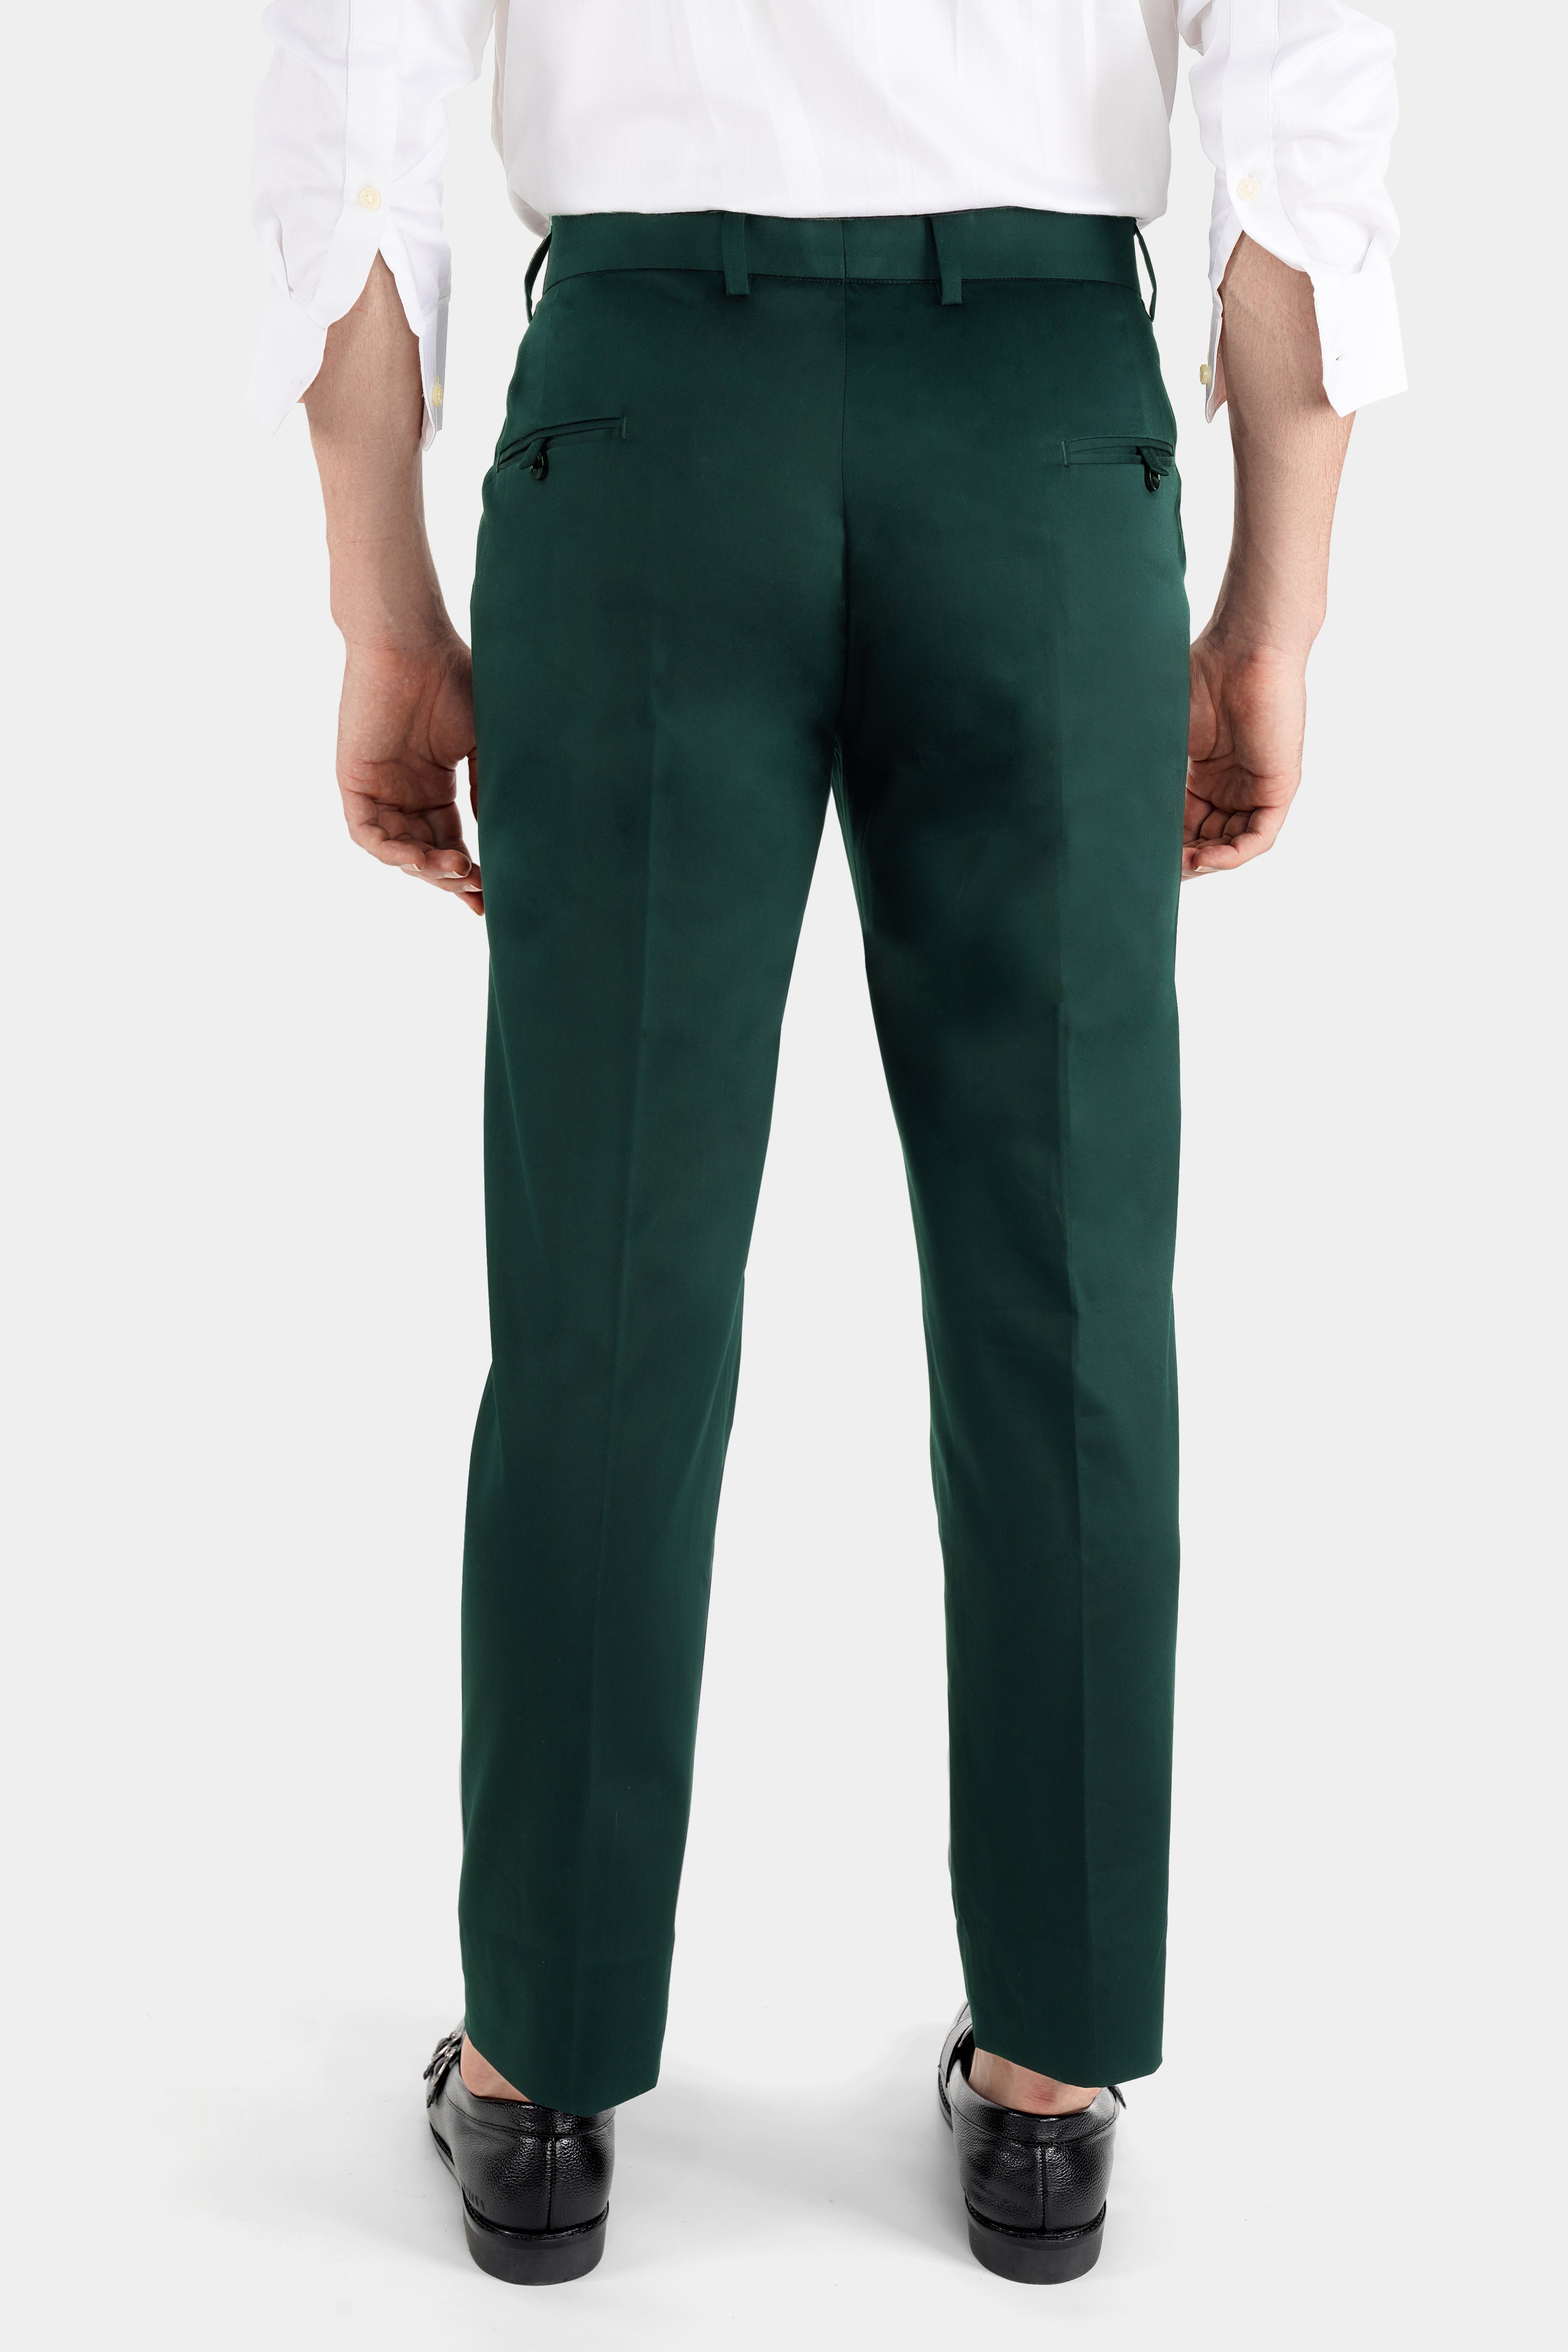 42 Mens Trousers - Buy 42 Mens Trousers Online at Best Prices In India |  Flipkart.com